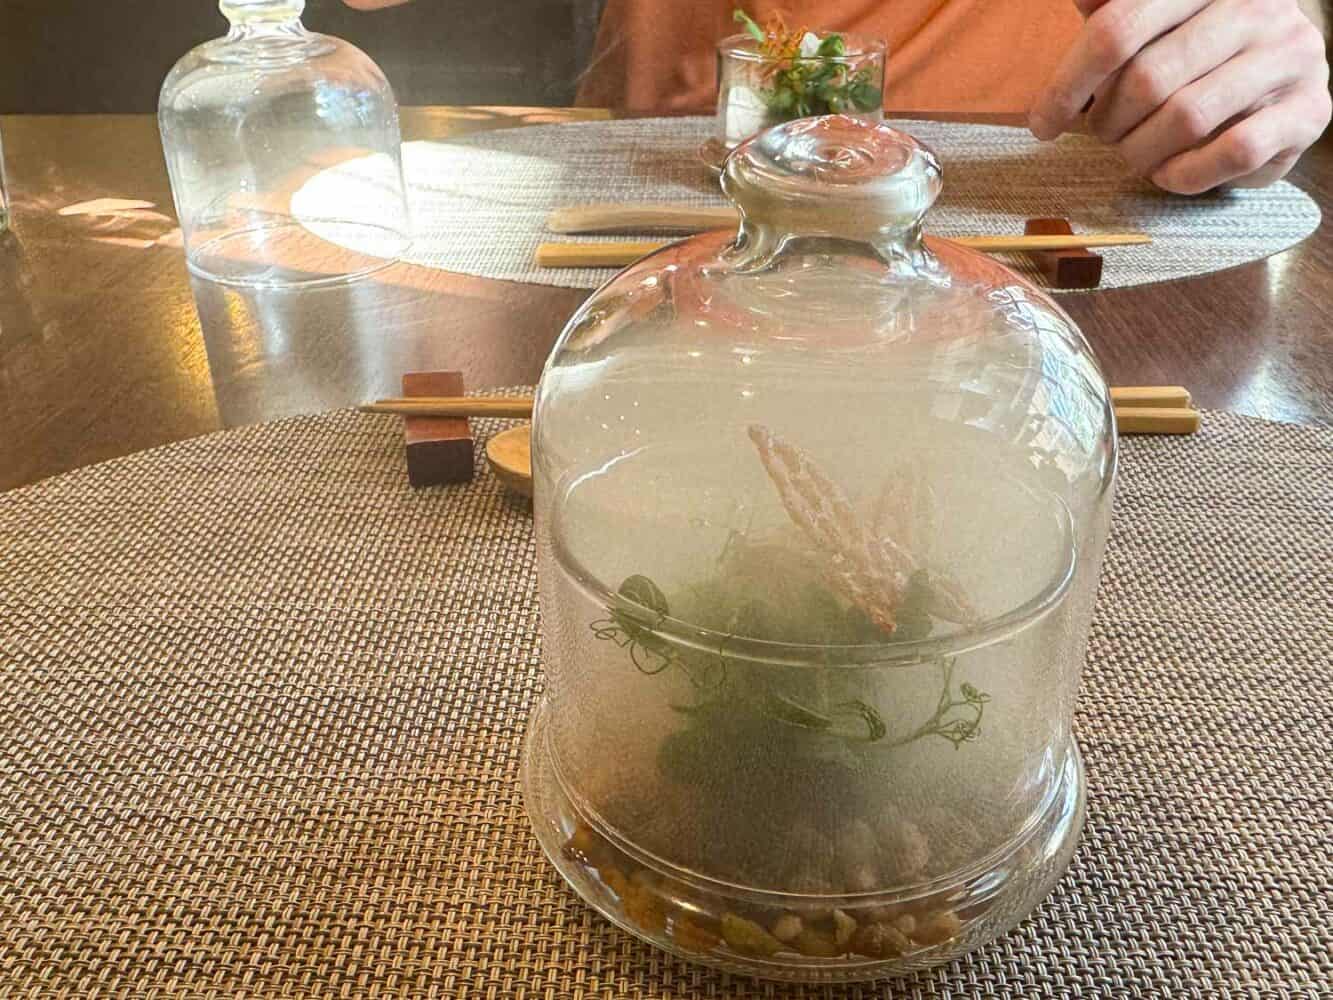 Smoked salad served in a glass jar at Saido vegan restaurant in Tokyo